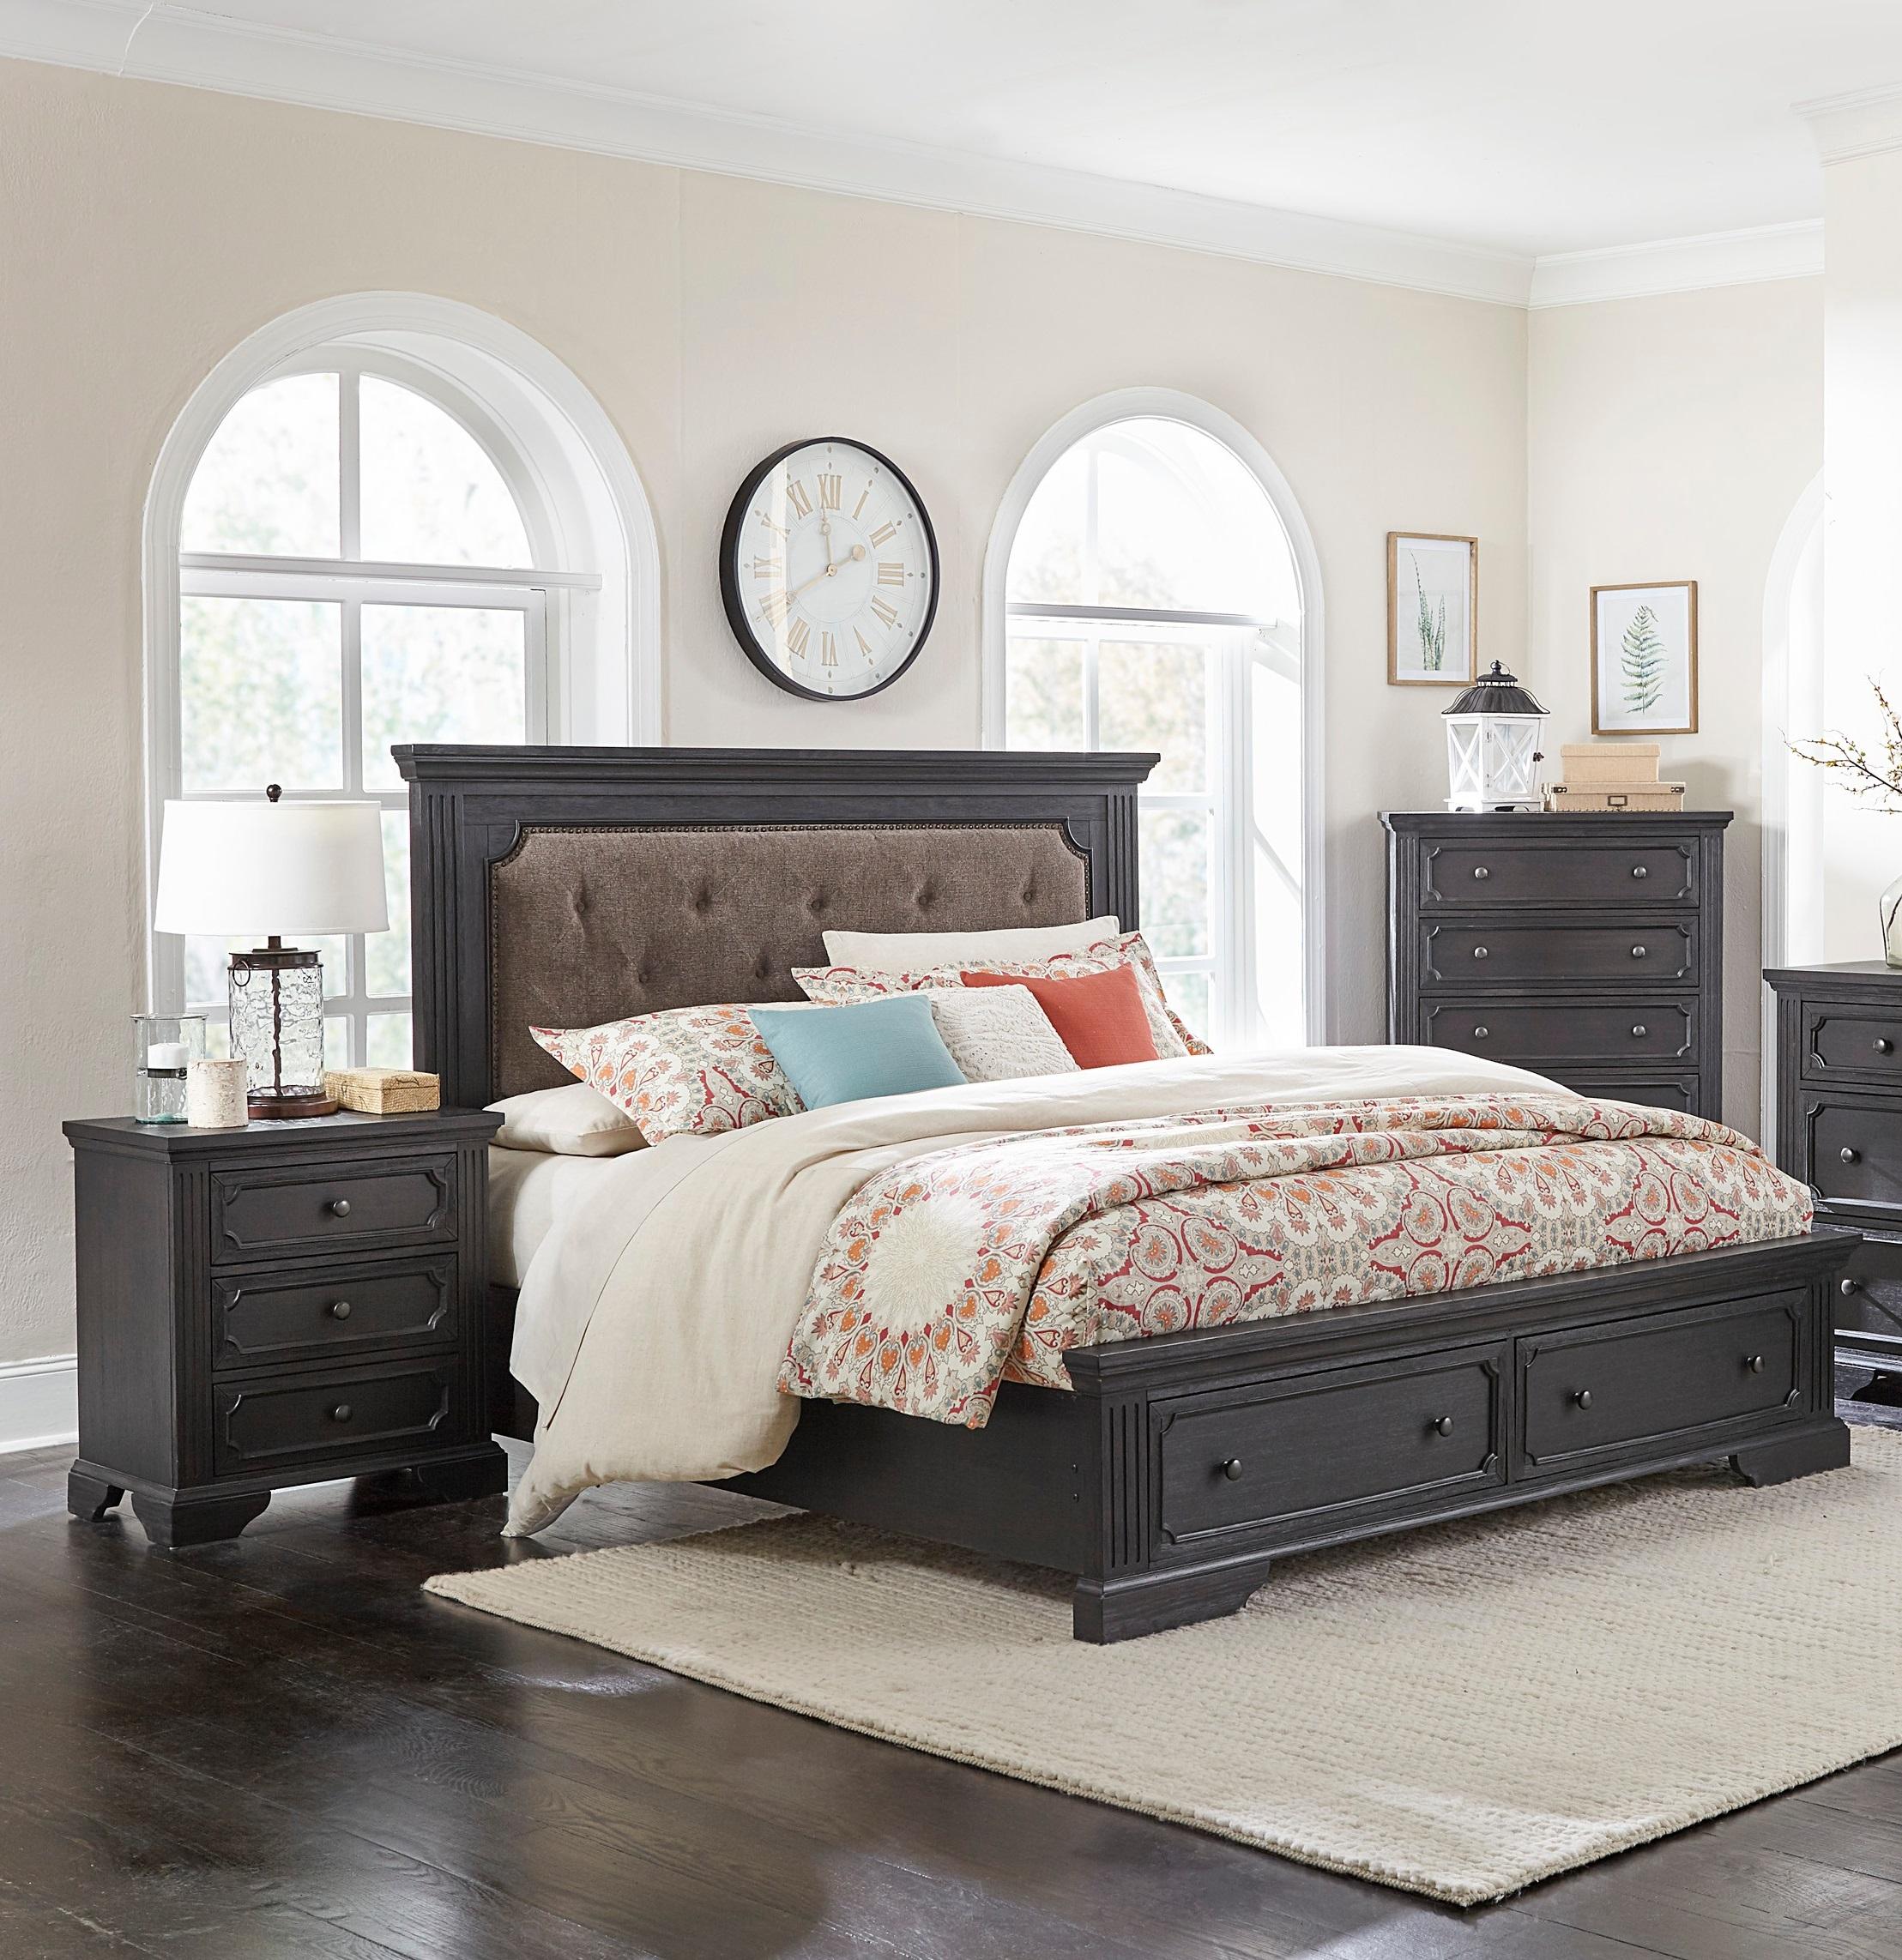 Rustic Bedroom Set 1647K-1CK-3PC Bolingbrook 1647K-1CK-3PC in Charcoal Polyester